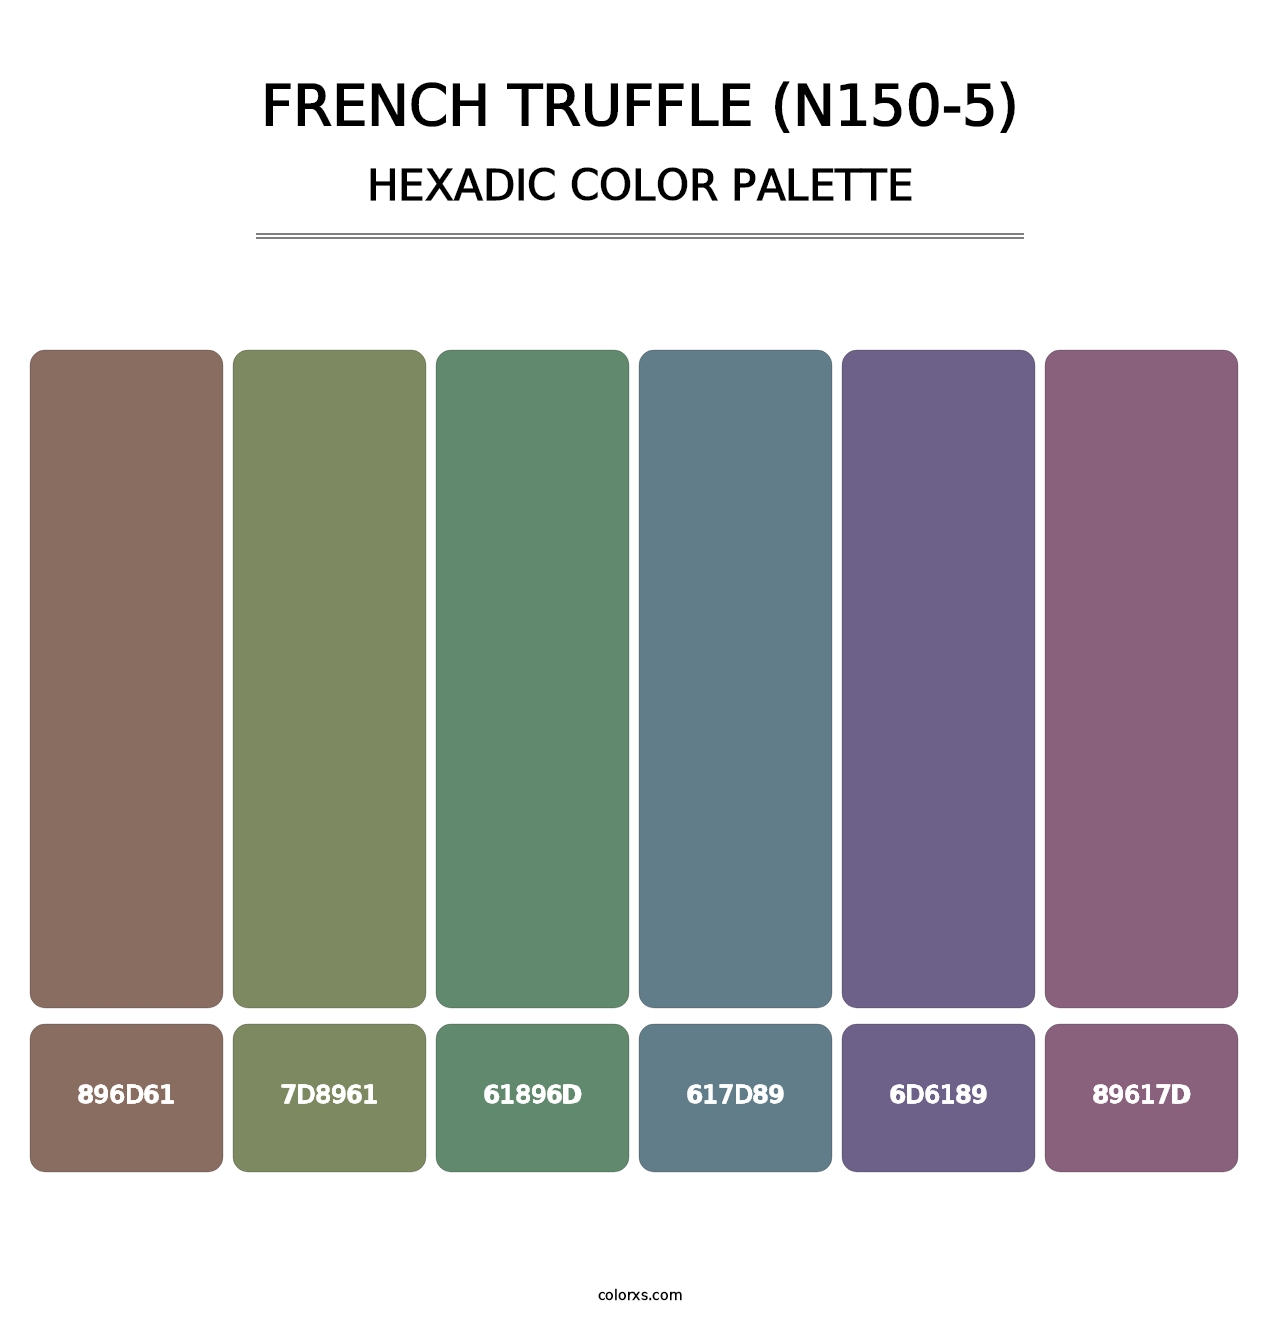 French Truffle (N150-5) - Hexadic Color Palette